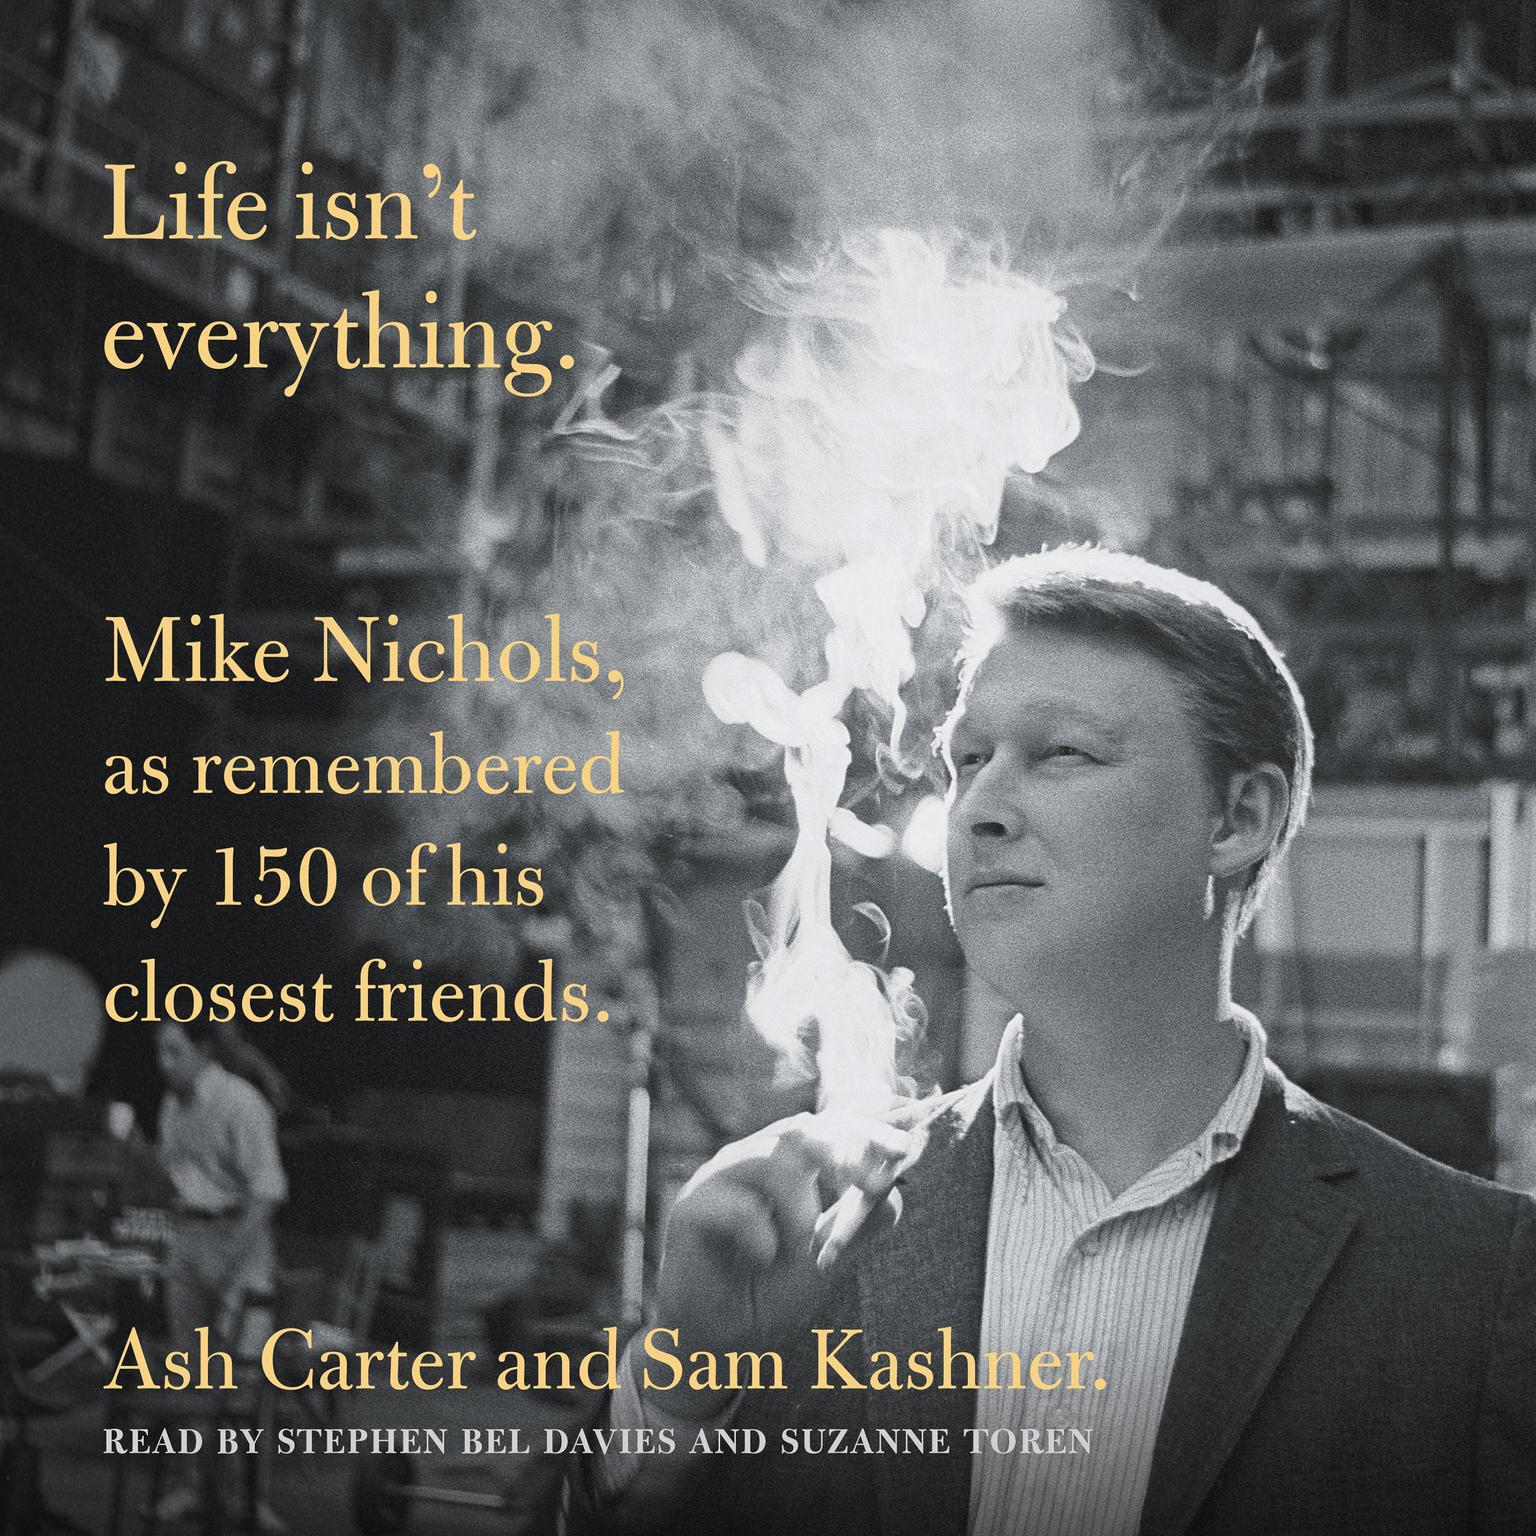 Life isnt everything: Mike Nichols, as remembered by 150 of his closest friends. Audiobook, by Ash Carter